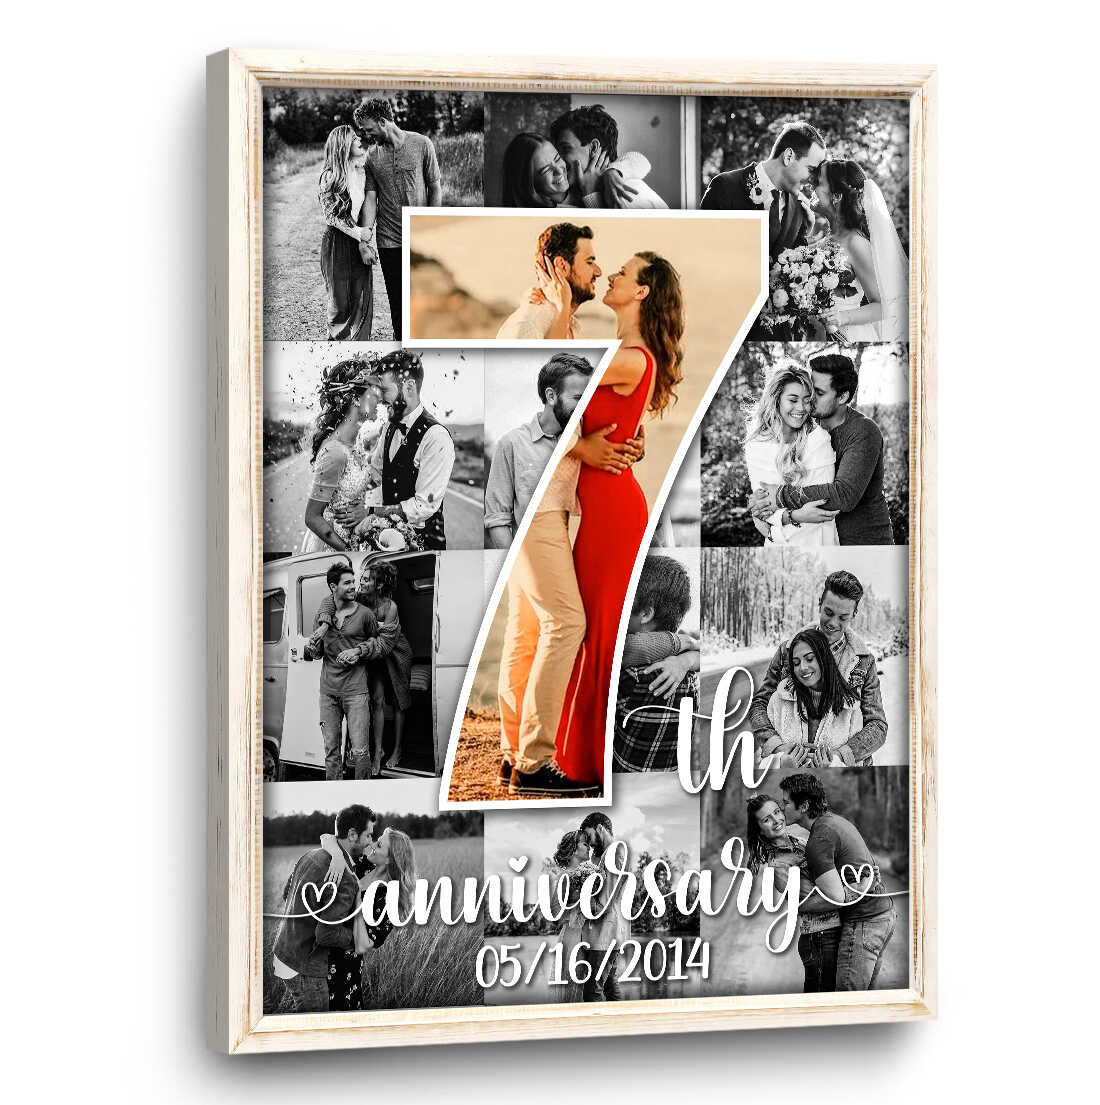 Personalized Photo Collage Canvas Art, 7th Anniversary Collage Gift, Black and White Canvas